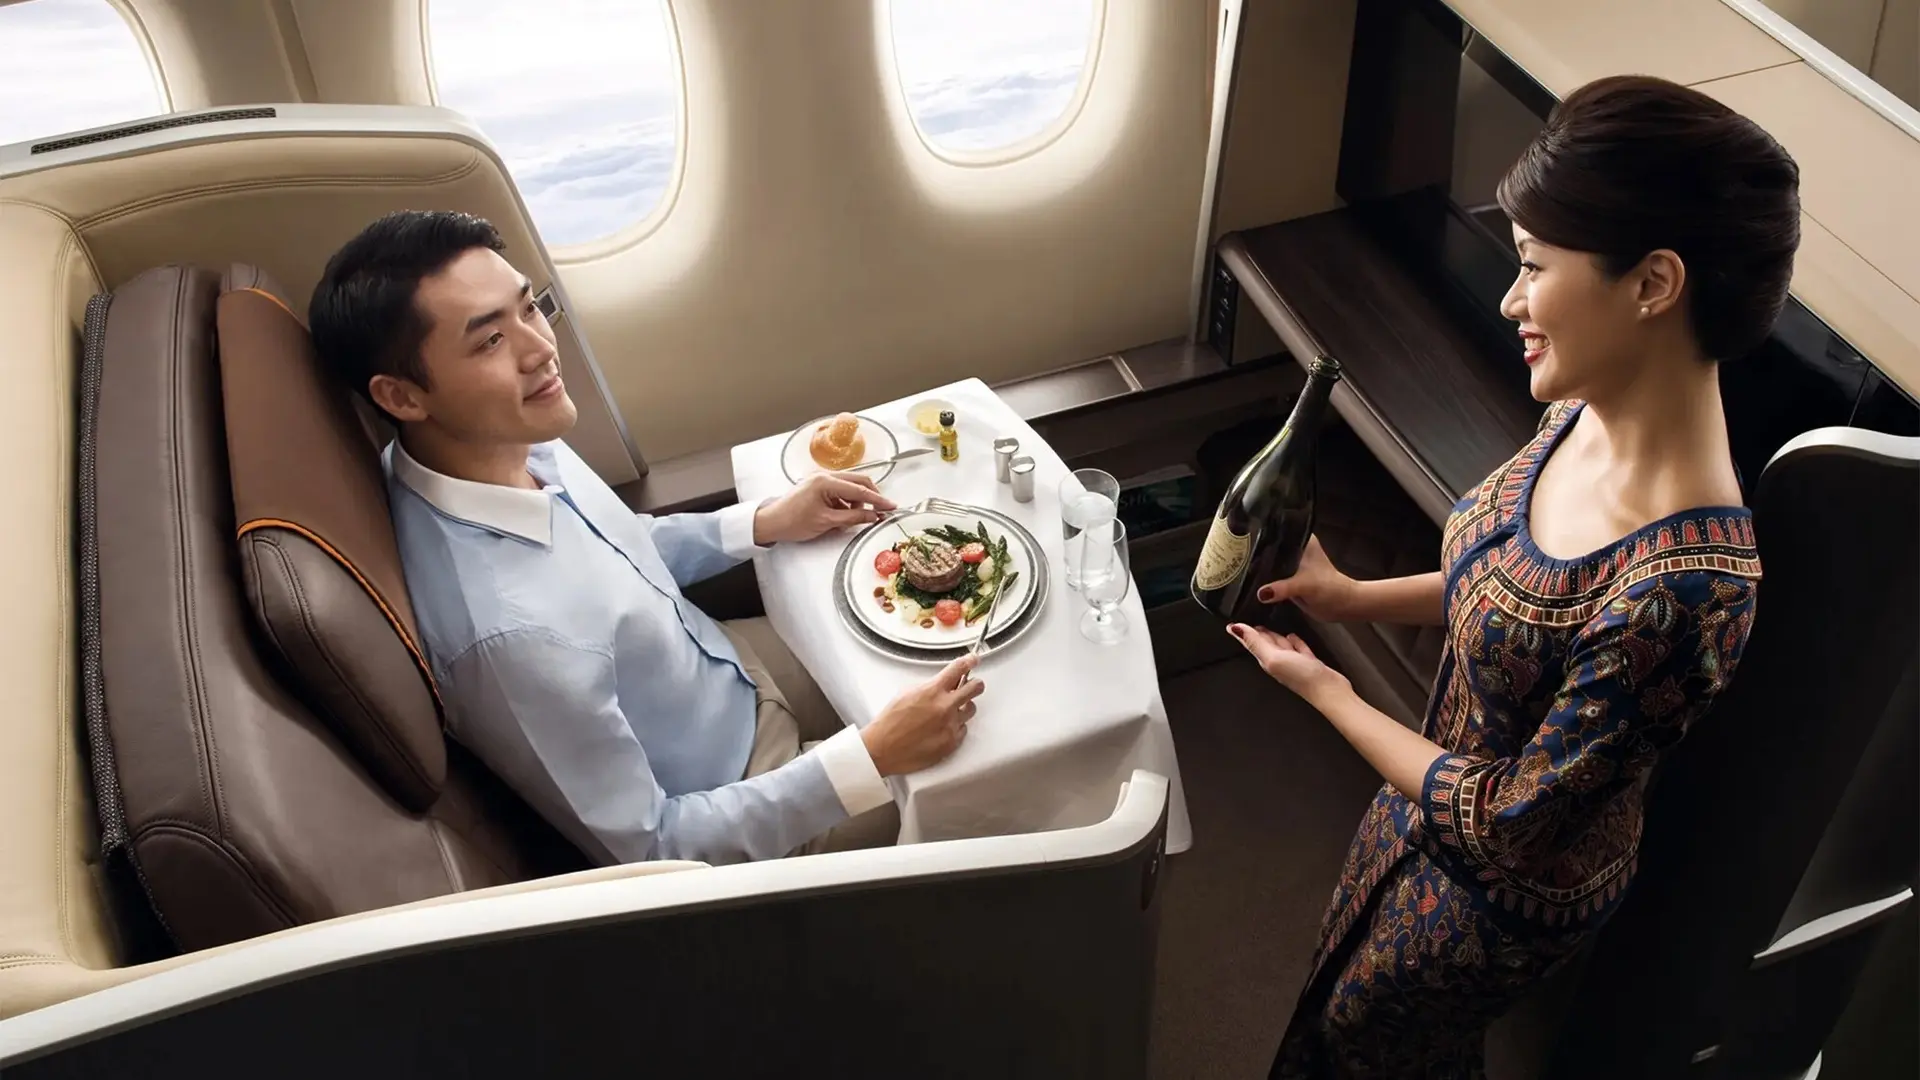 Airlines News - Singapore Airlines celebrates Champagne in First Class